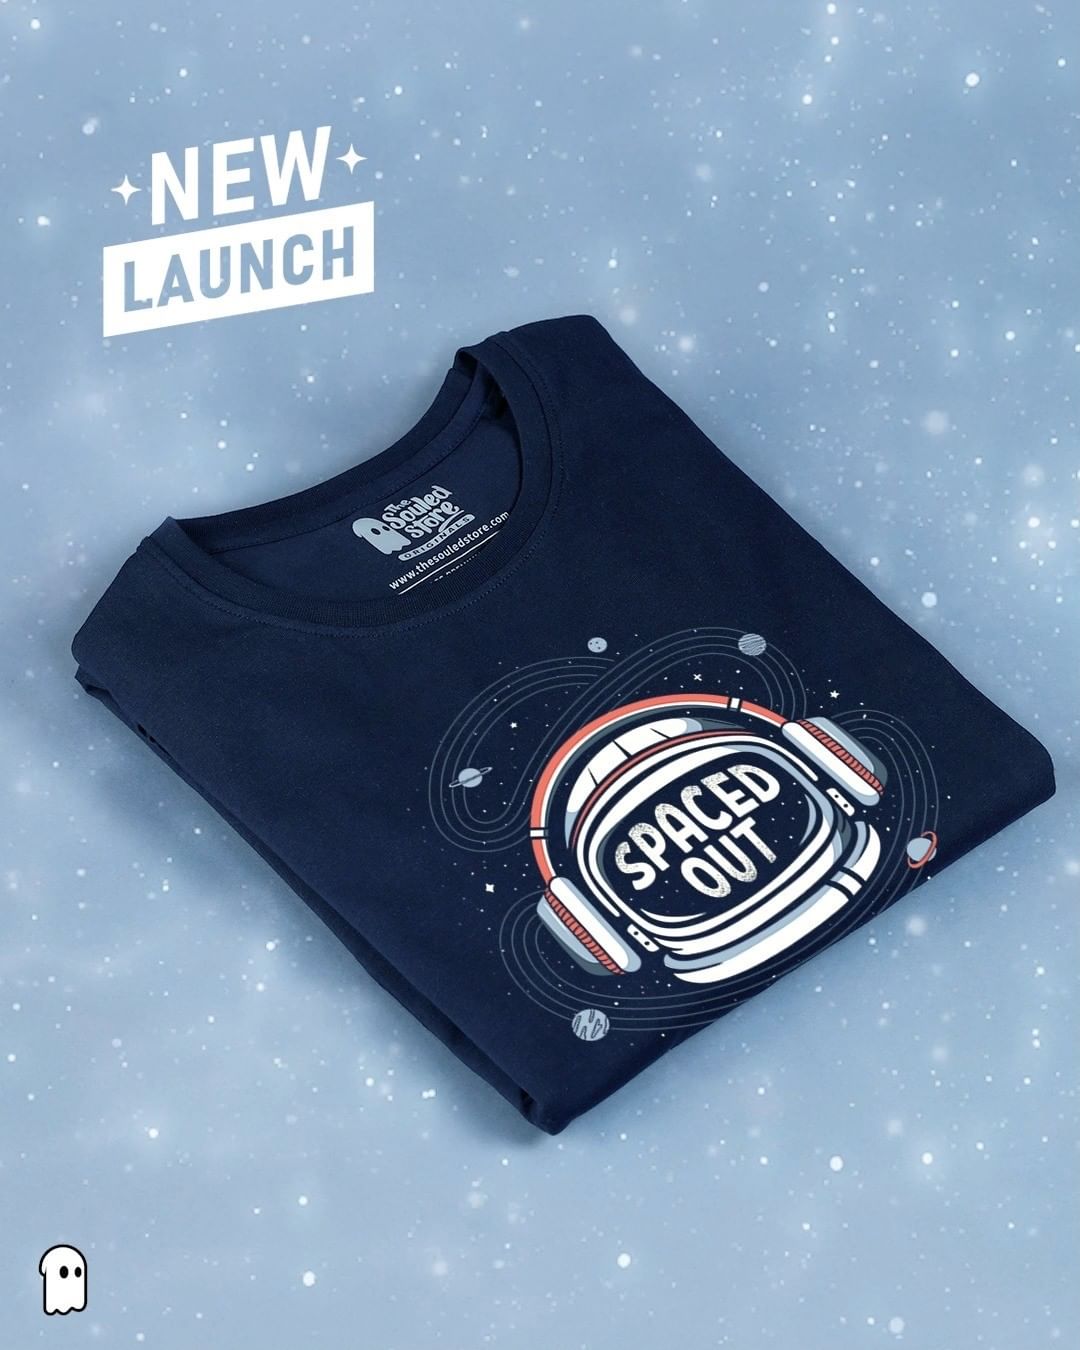 The Souled Store - It's launch time🚀

Tap to shop.

#TheSouledStore #CelebrateFandom #ExpressYourself #SpacedOut #NeedSomeSpace #Funny #FunnyTshirt #Tshirt #TshirtMurah #Flatlay #Videoedit #Photoshoot...